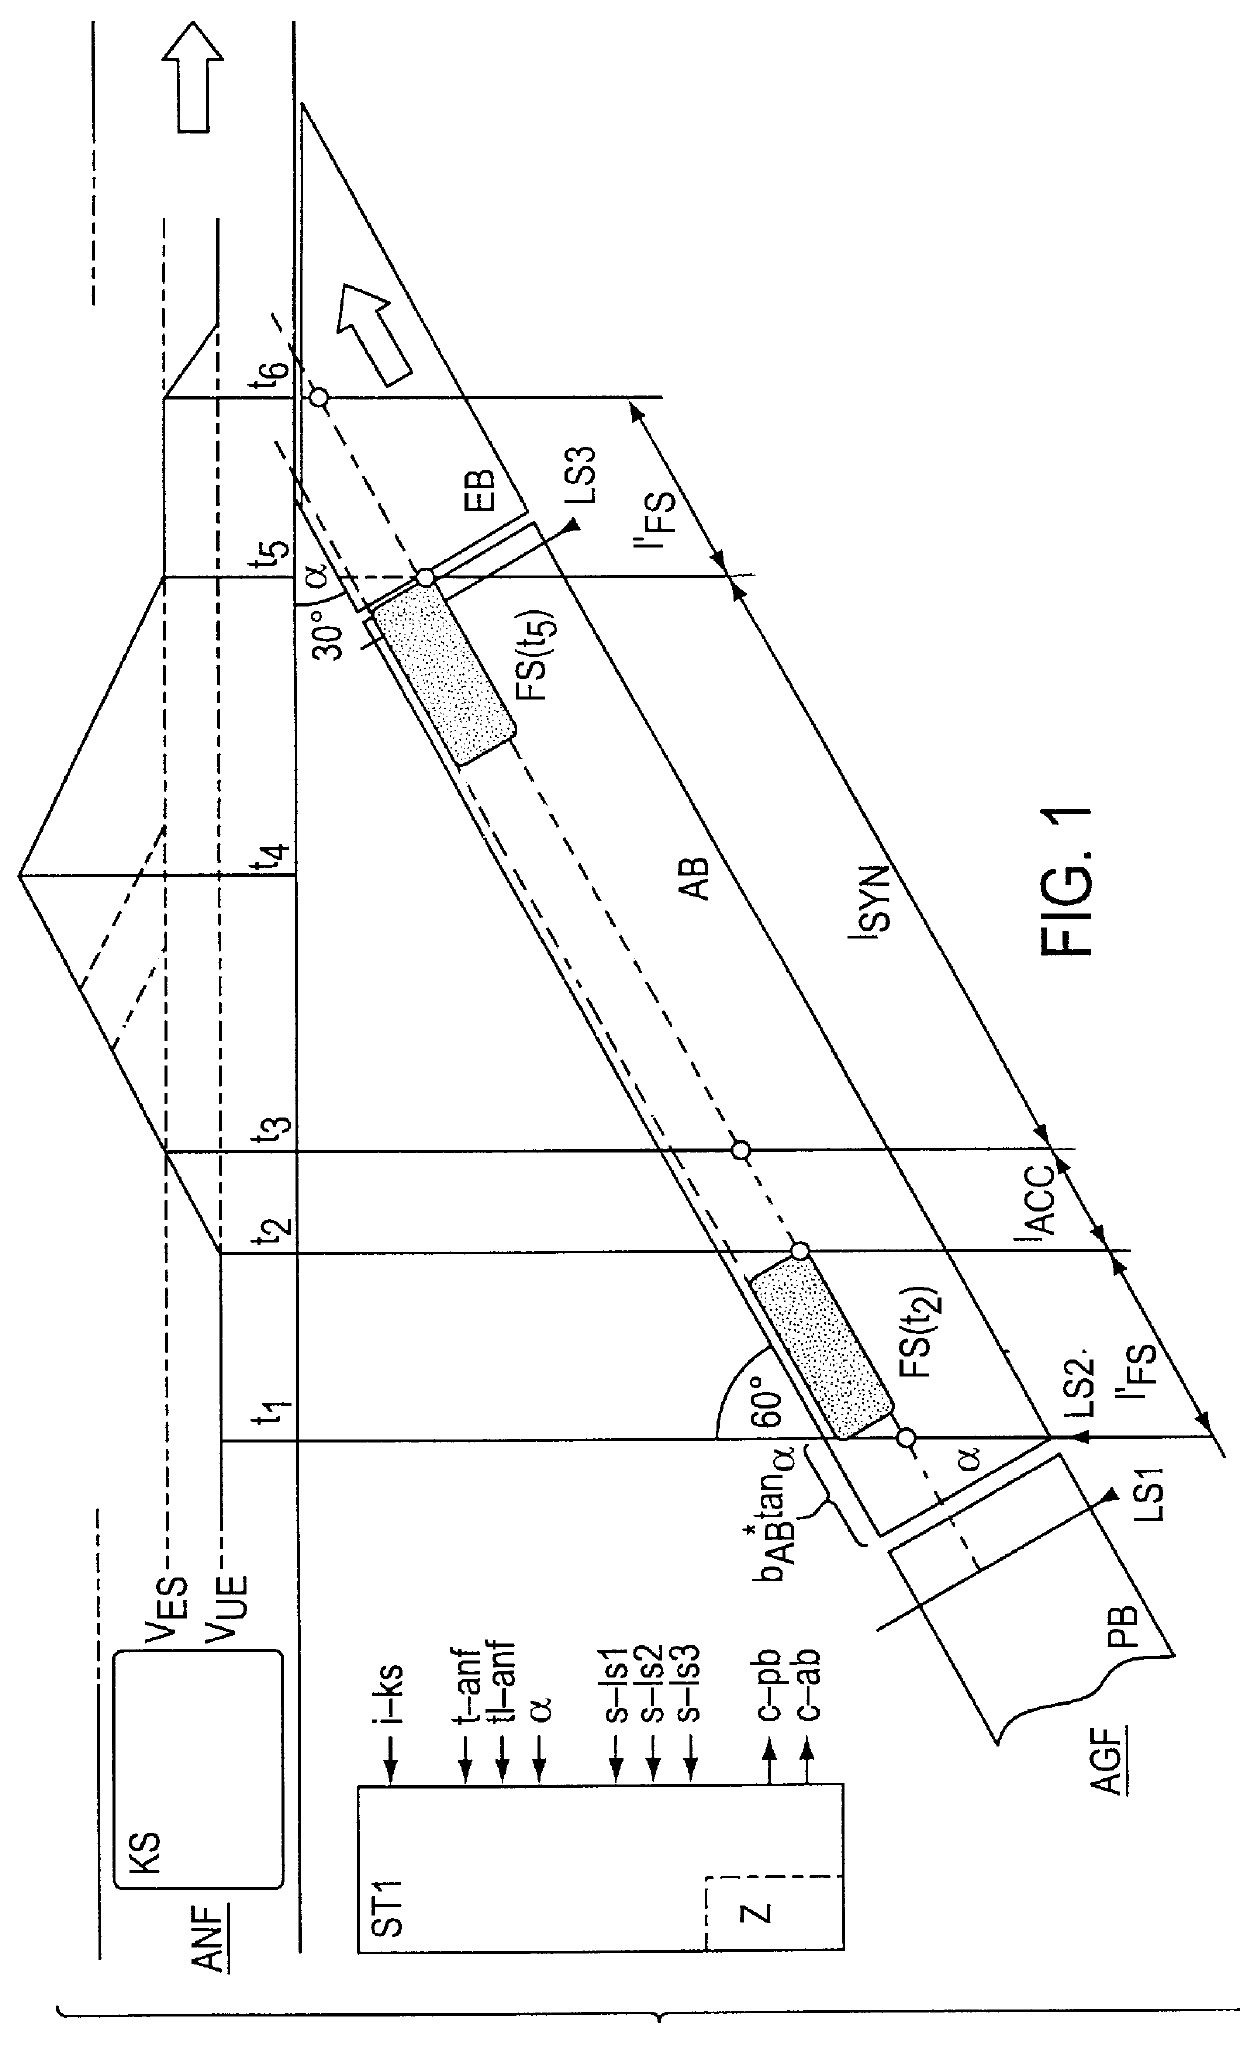 Method and device for channeling parceled goods